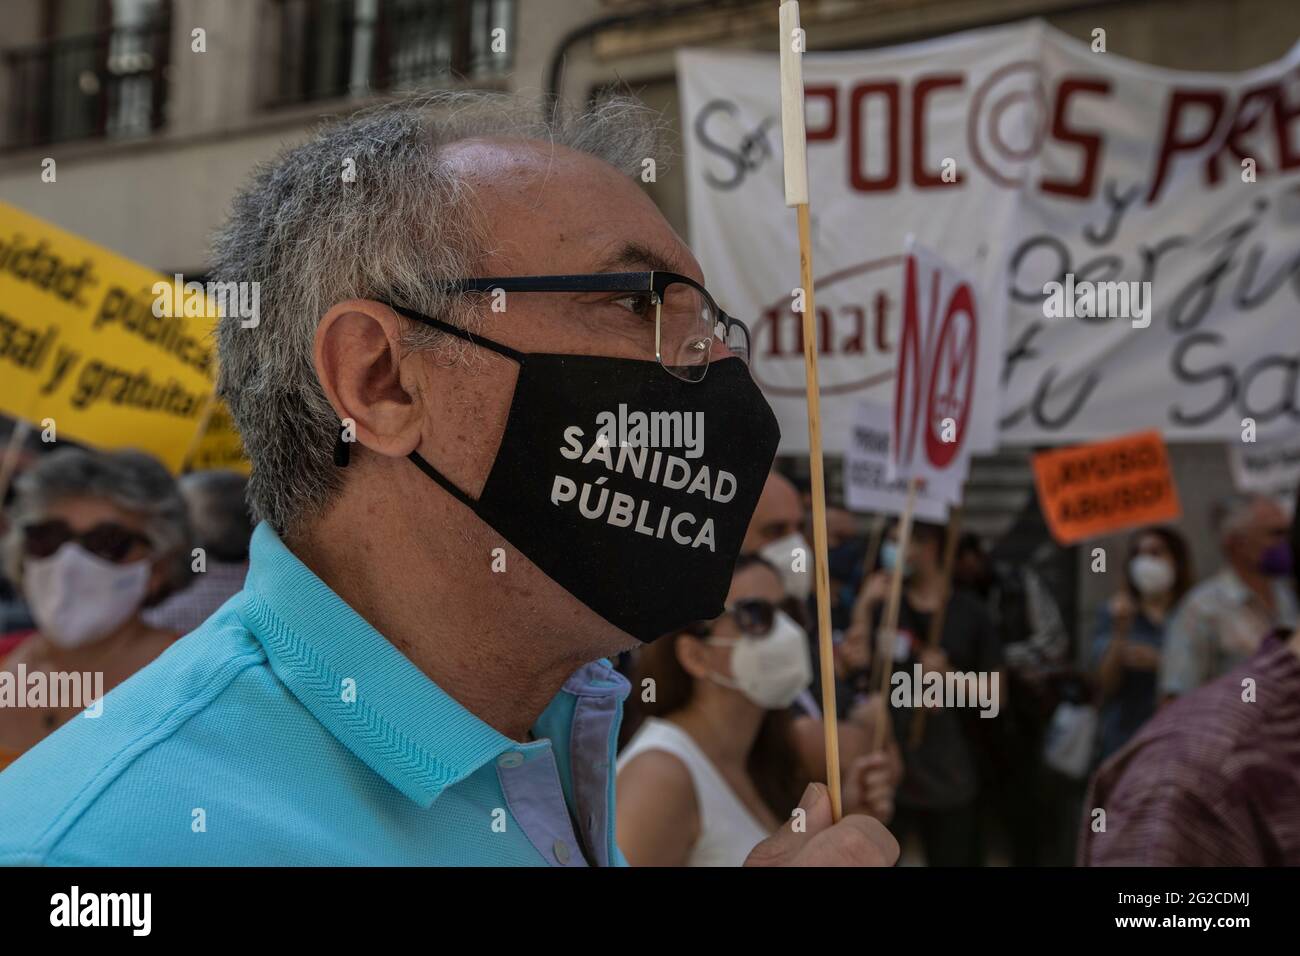 A protester wearing a facemask saying Public Health during the demonstration.A group of protesters gathered outside the Ministry of Health to demonstrate against the closures of health centres and primary care services. (Photo by Guillermo Gutierrez Carrascal / SOPA Images/Sipa USA) Stock Photo